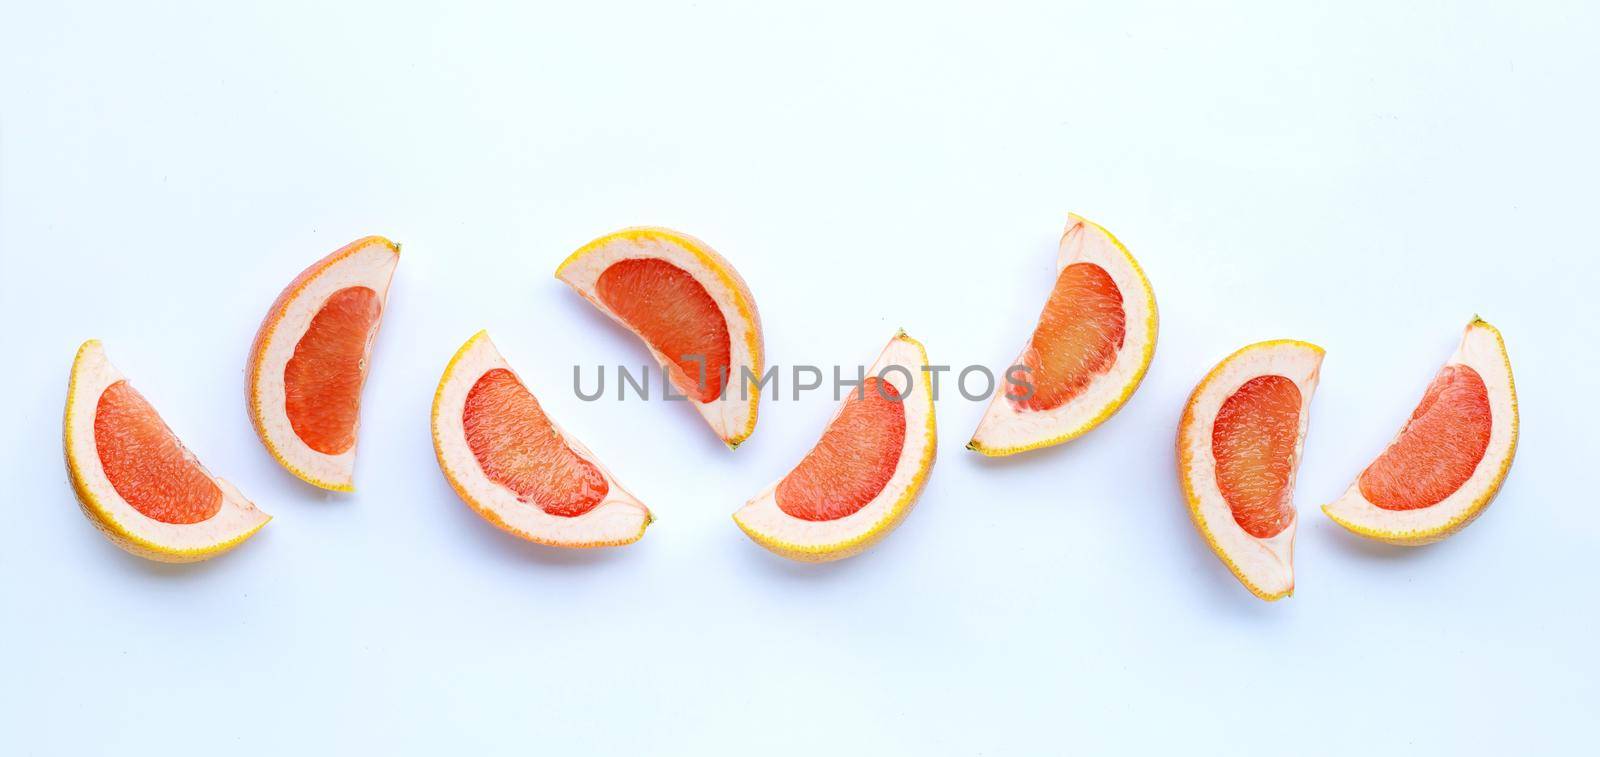 High vitamin C. Juicy grapefruit slices on white.  by Bowonpat